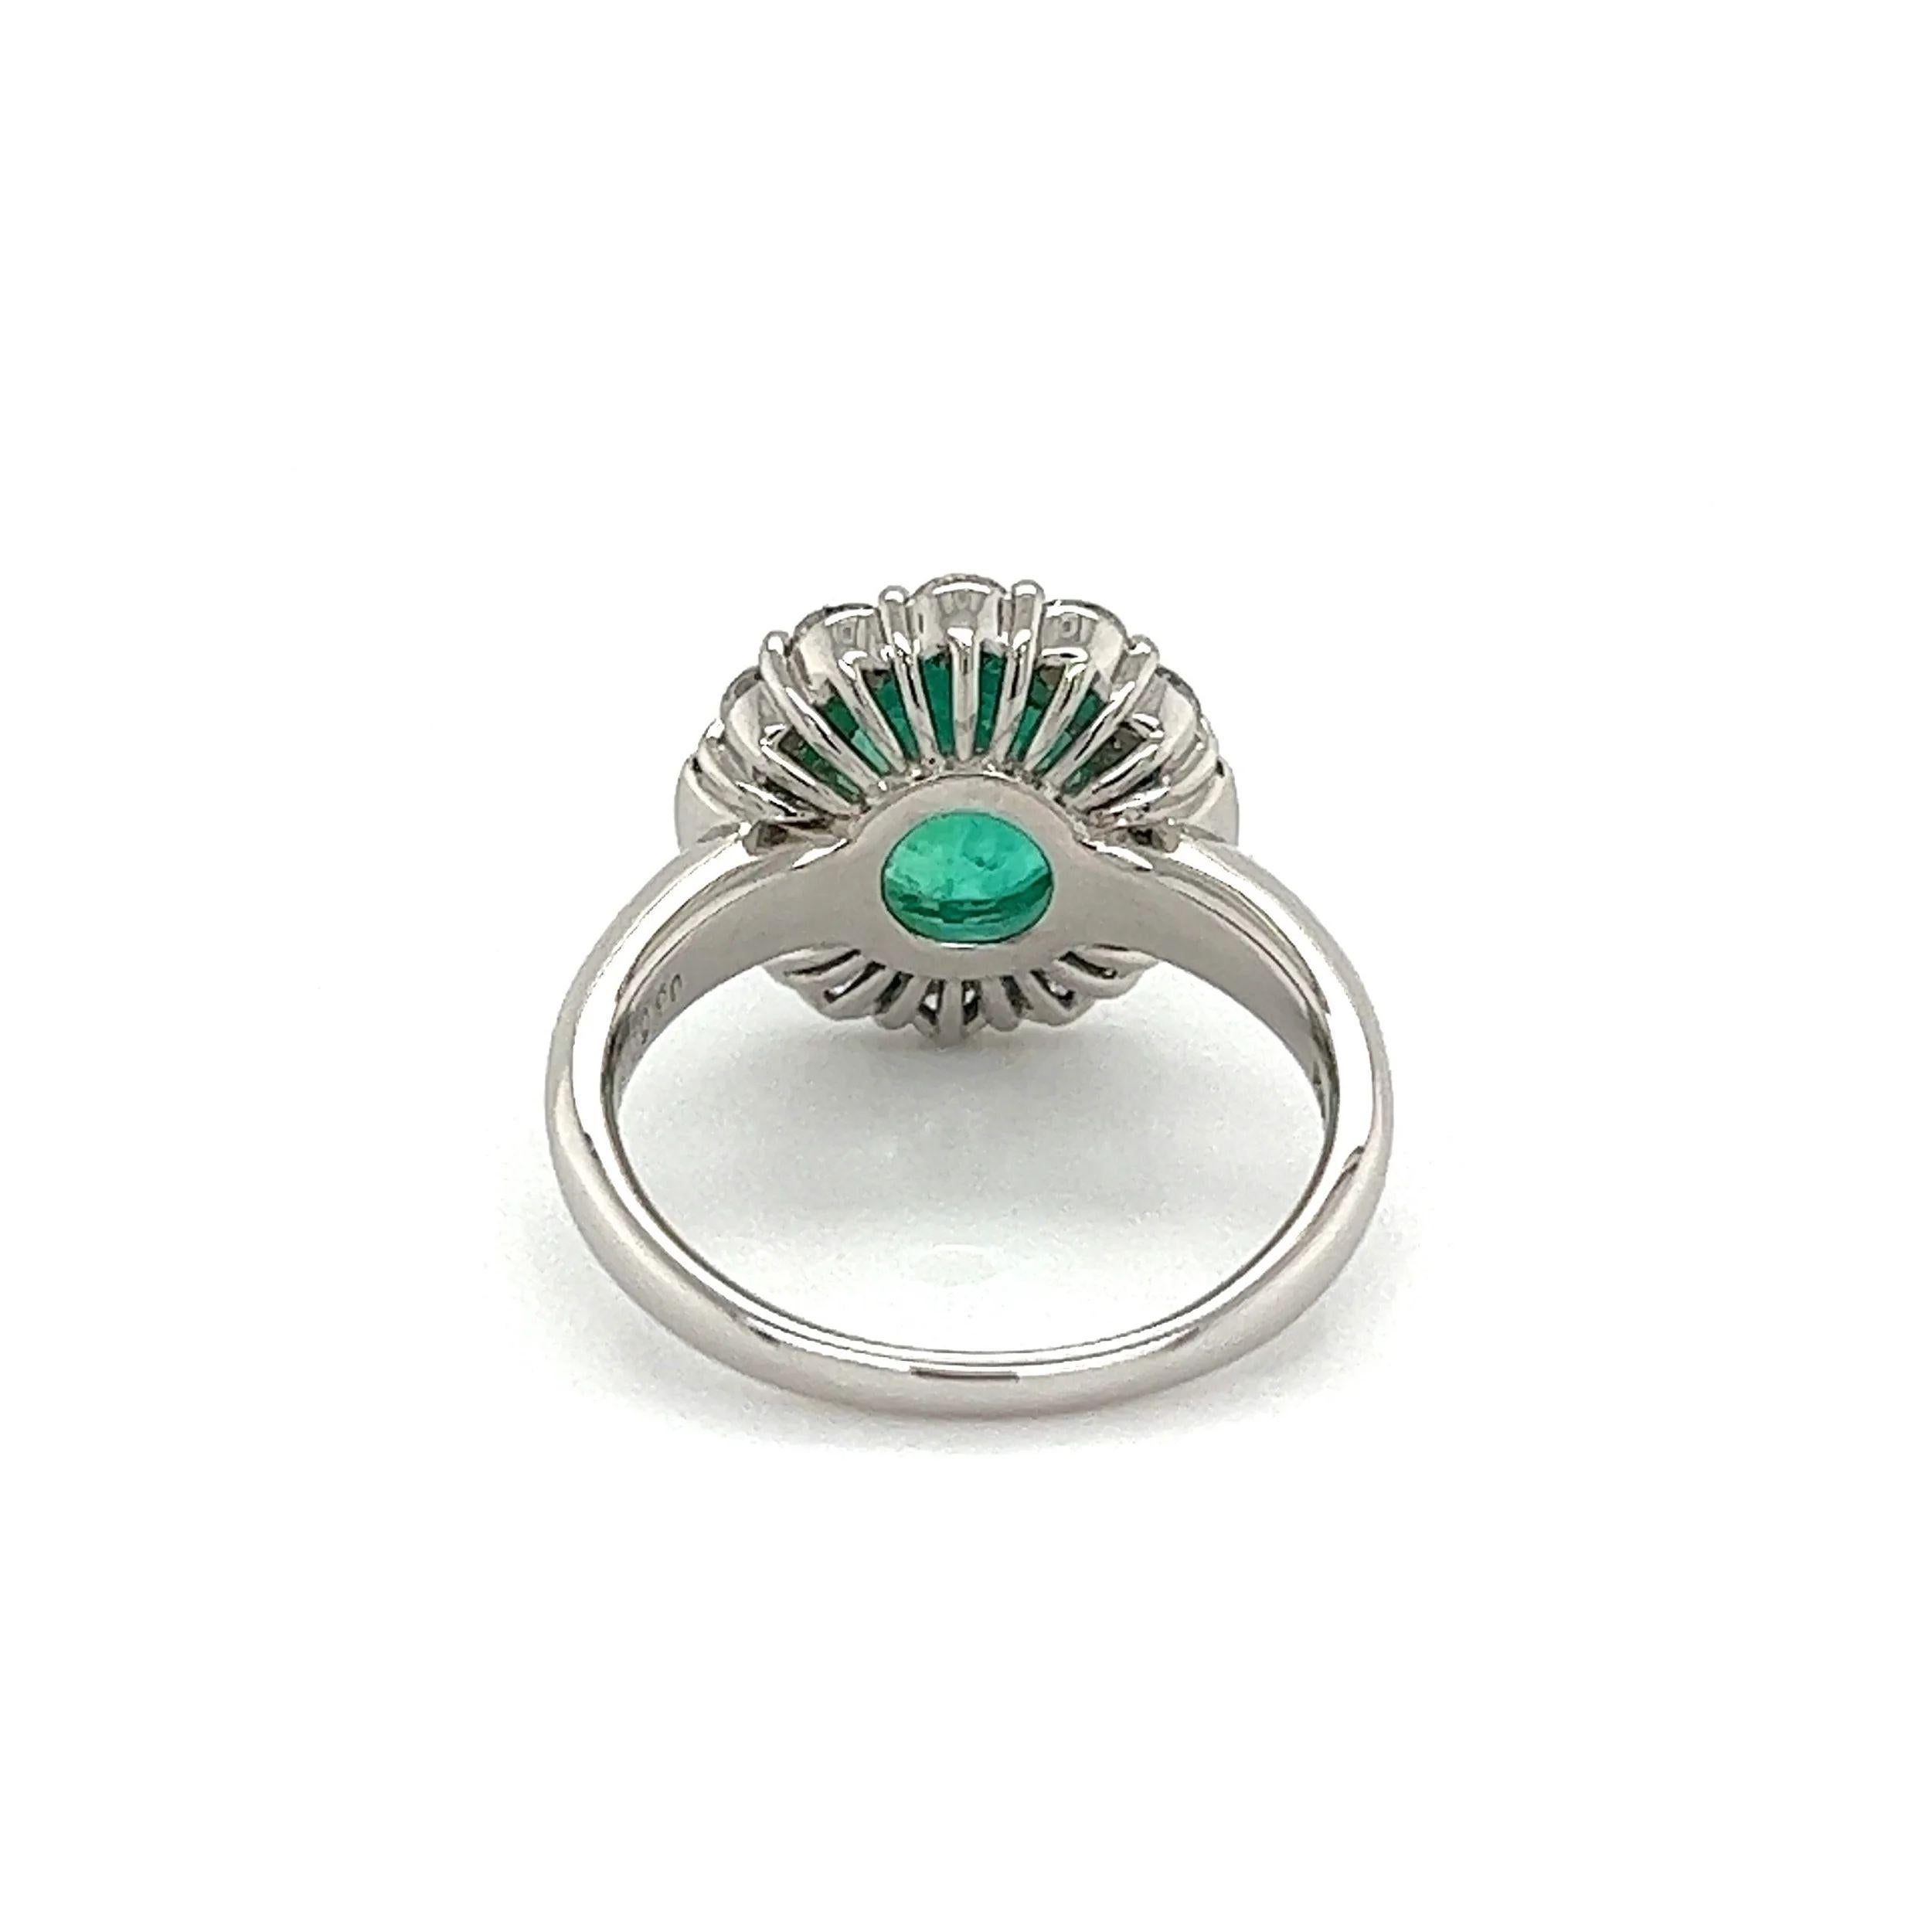 2.09 Carat Emerald and Diamond Vintage Platinum Ring Estate Fine Jewelry In Excellent Condition For Sale In Montreal, QC